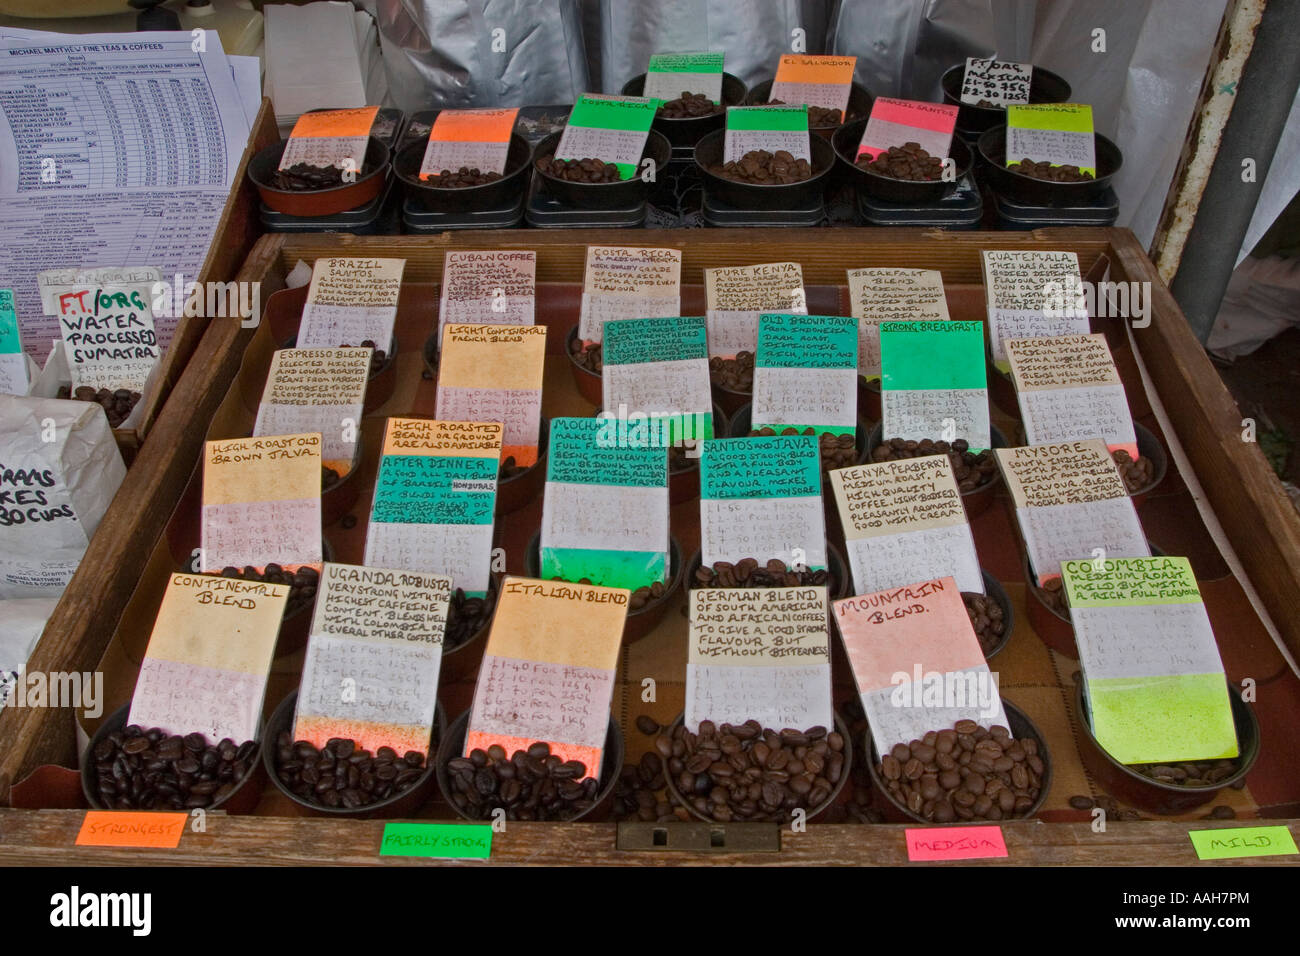 Different coffees and teas for sale, Cambridge market Cambridge England Stock Photo